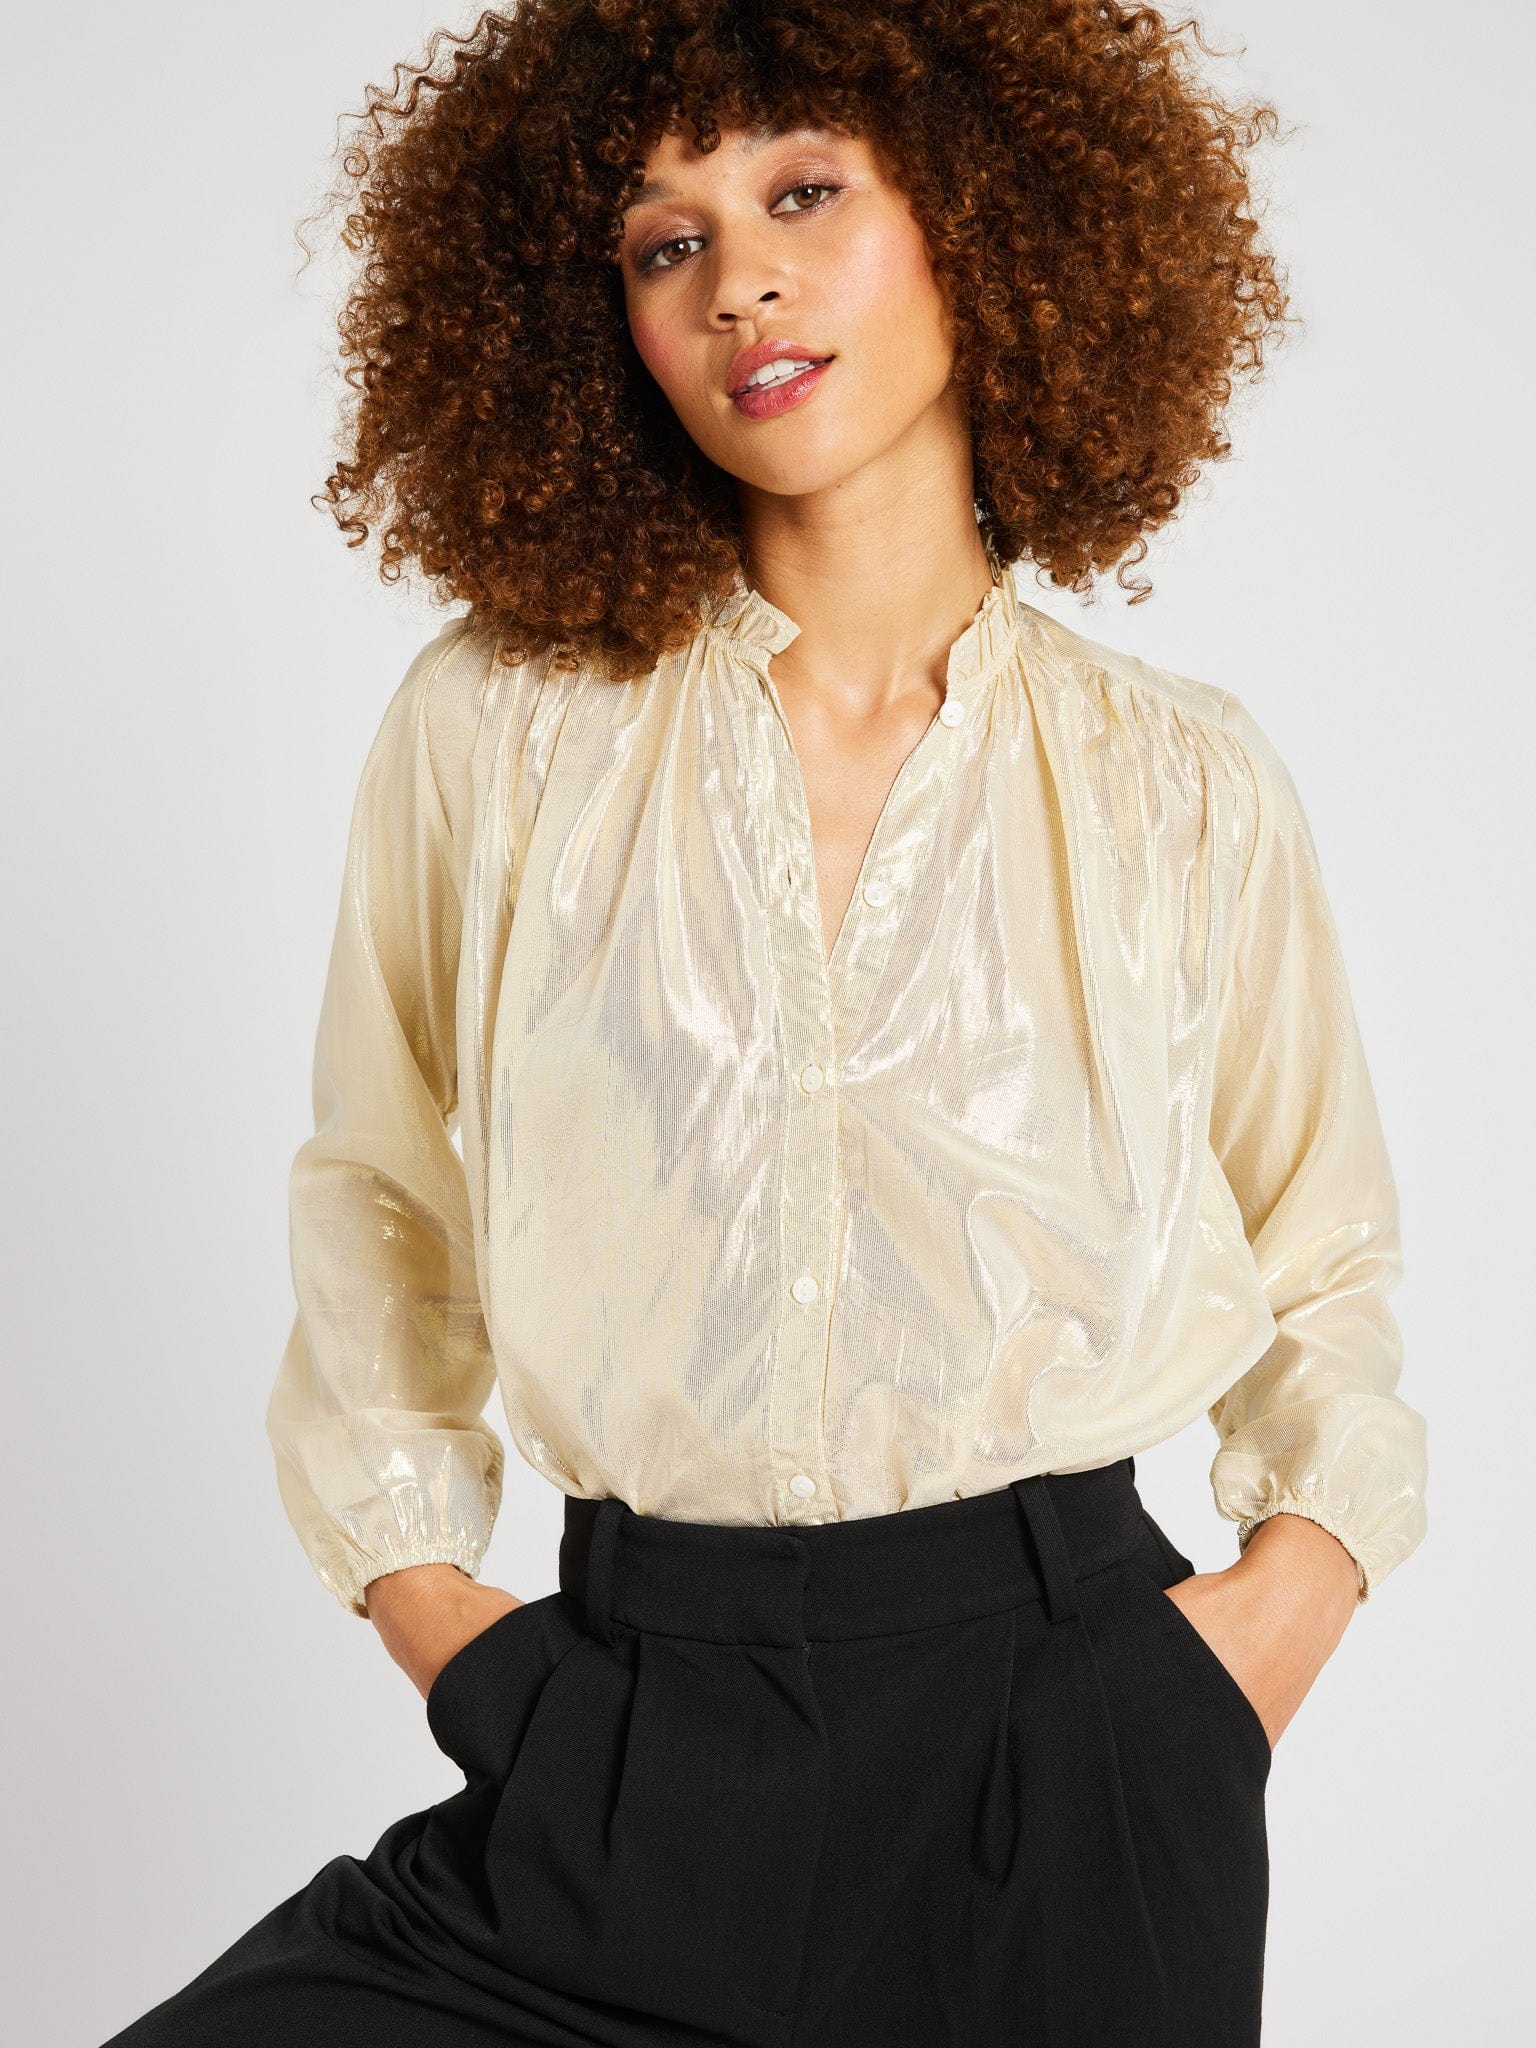 MILLE Clothing Francesca Top in Gold Lamé